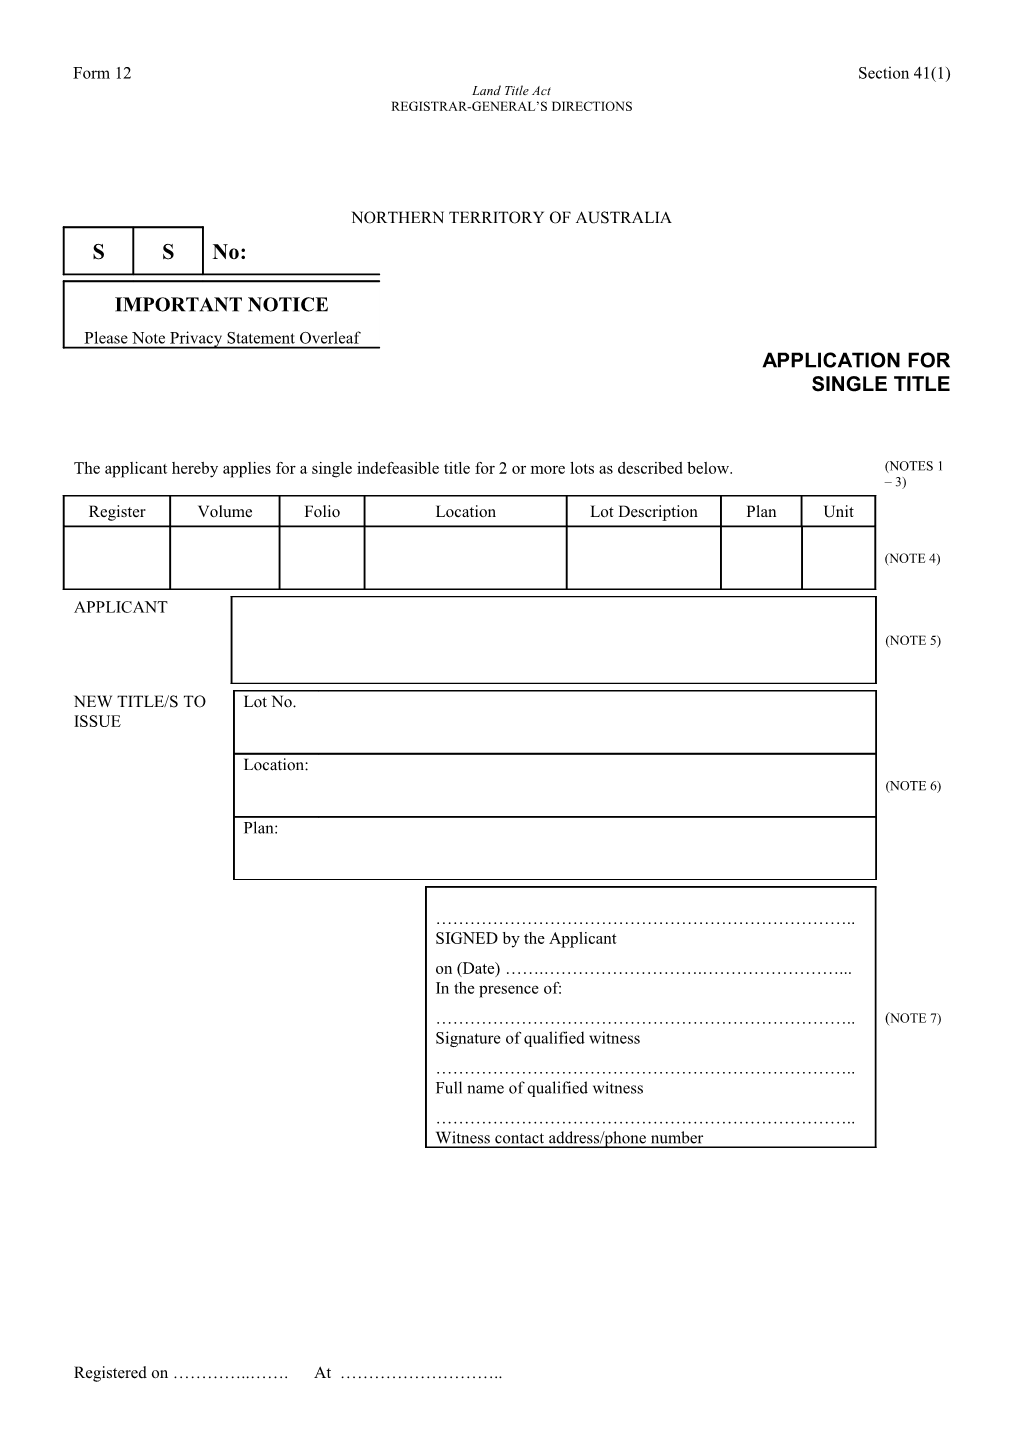 Form No. 12 - Application for Single Title